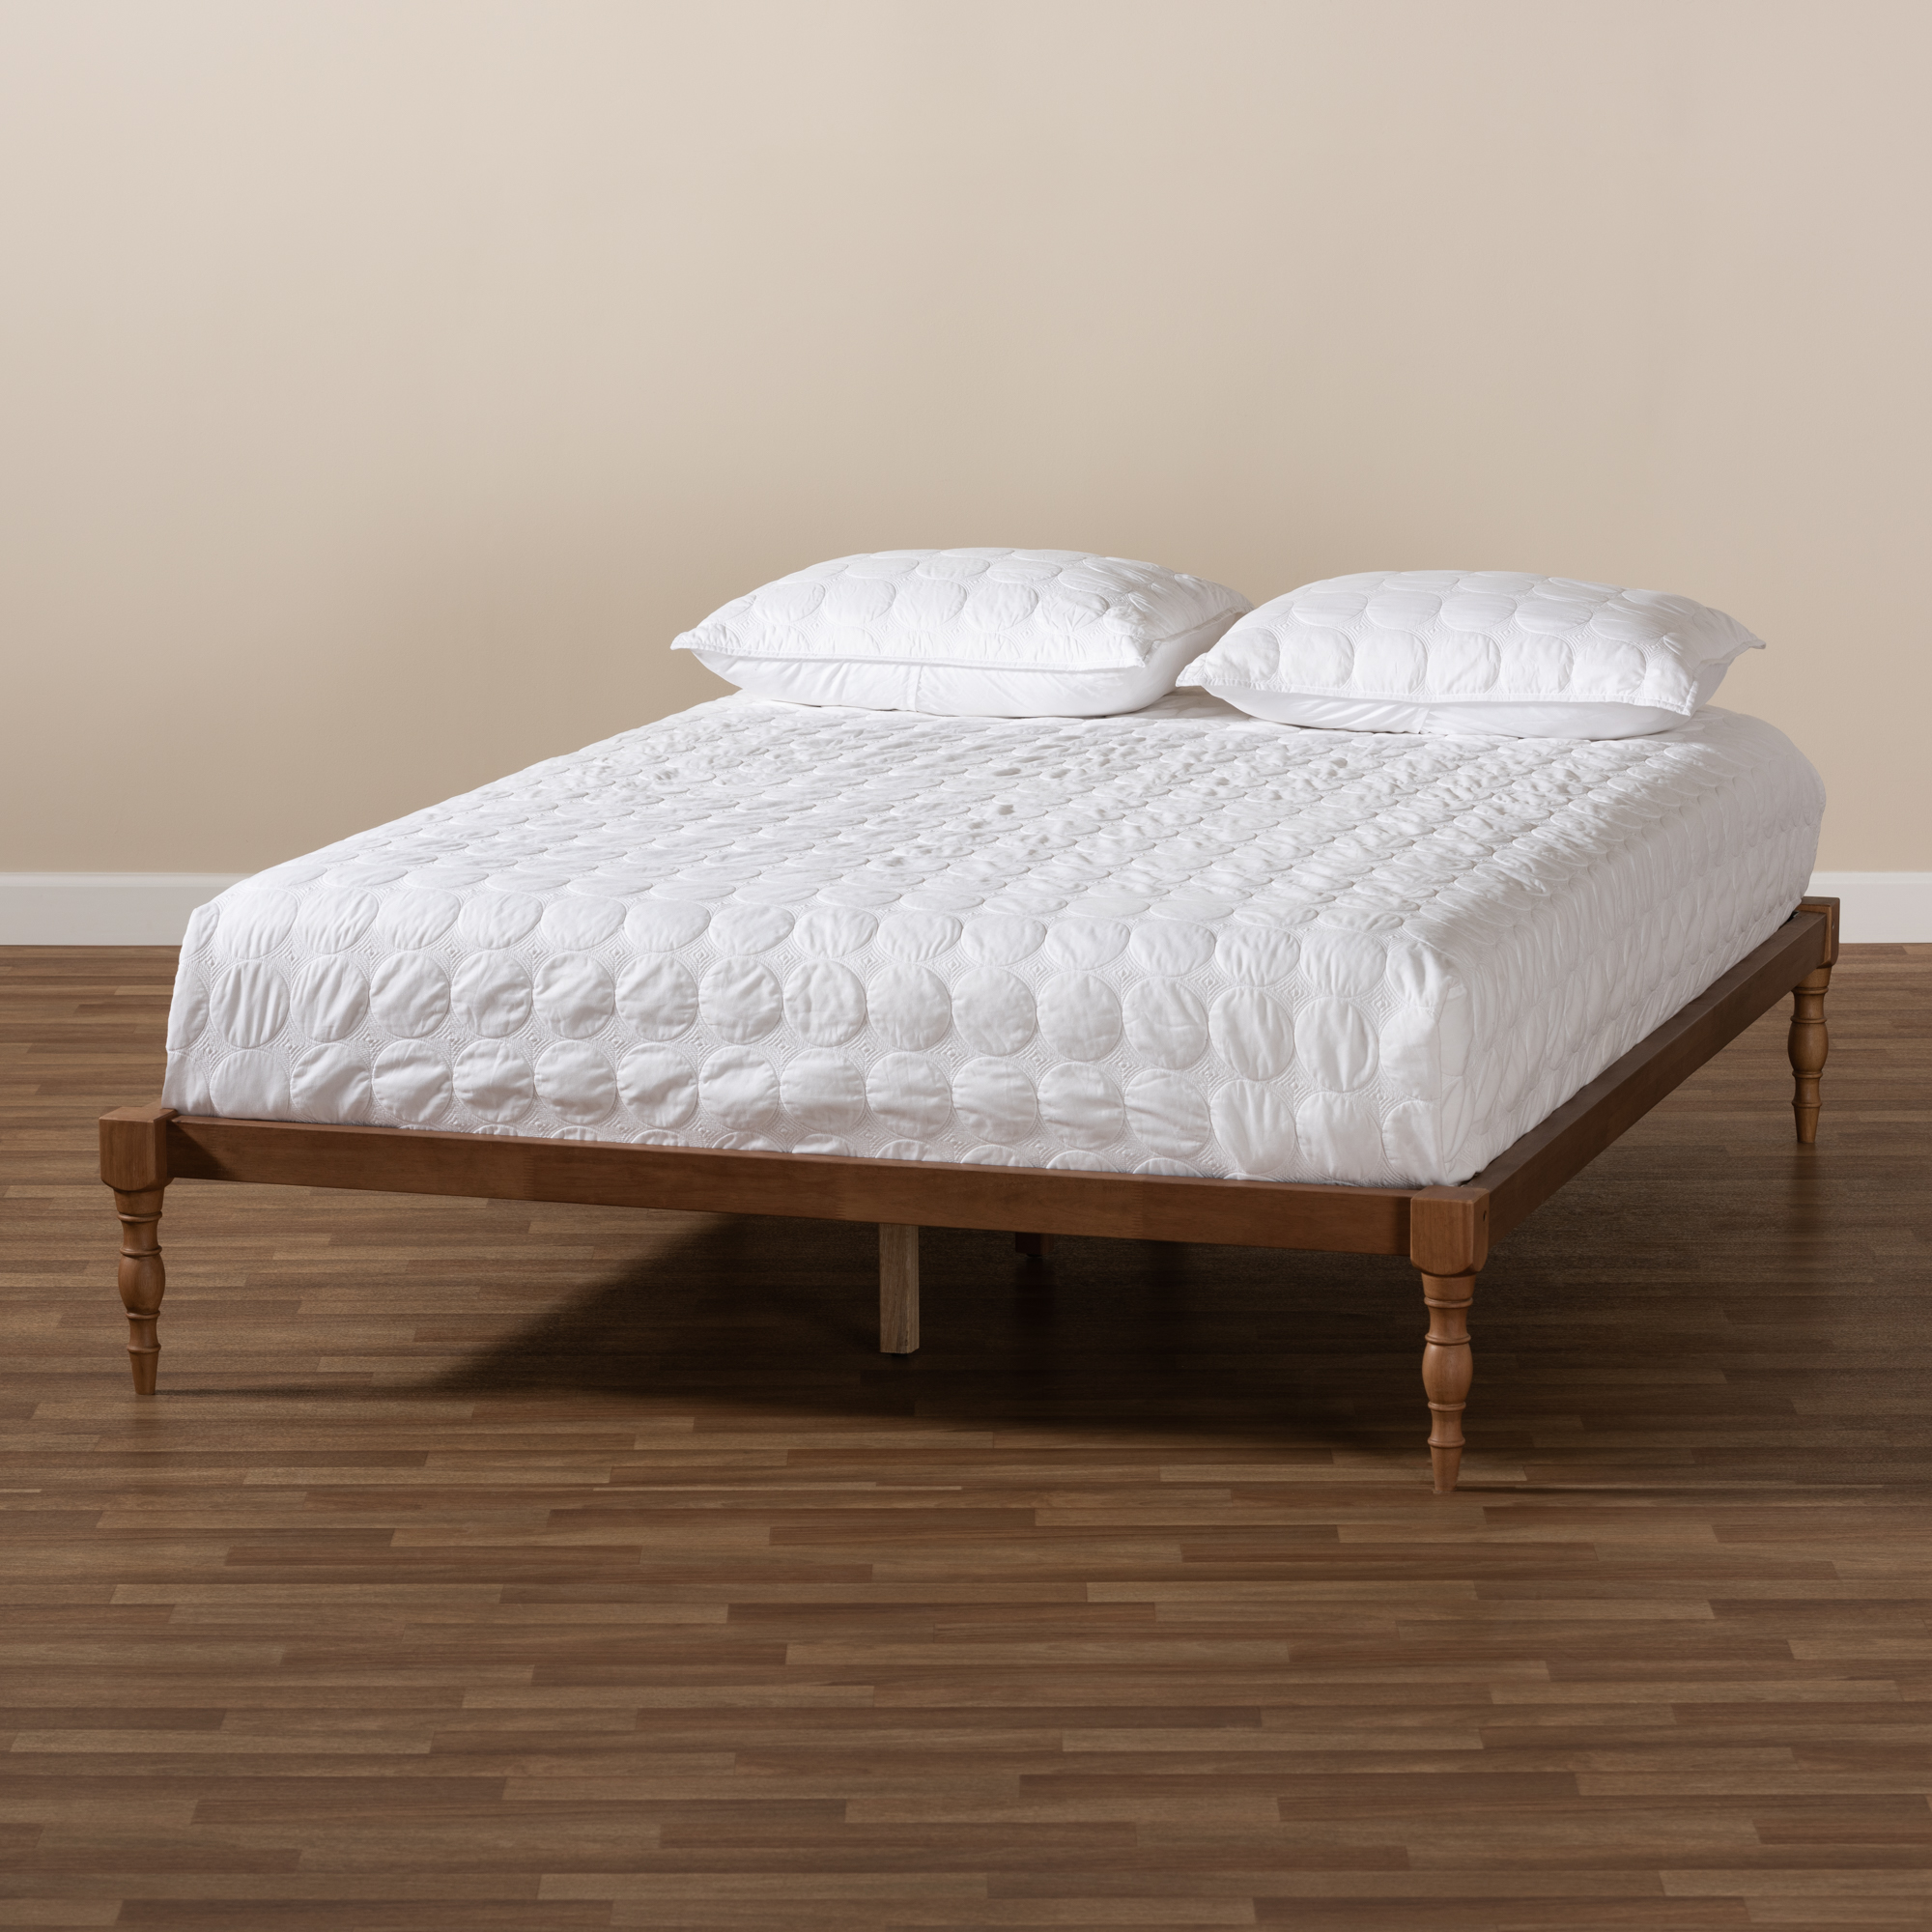 Baxton Studio Iseline Modern and Contemporary Walnut Brown Finished Wood Full Size Platform Bed Frame - image 5 of 9